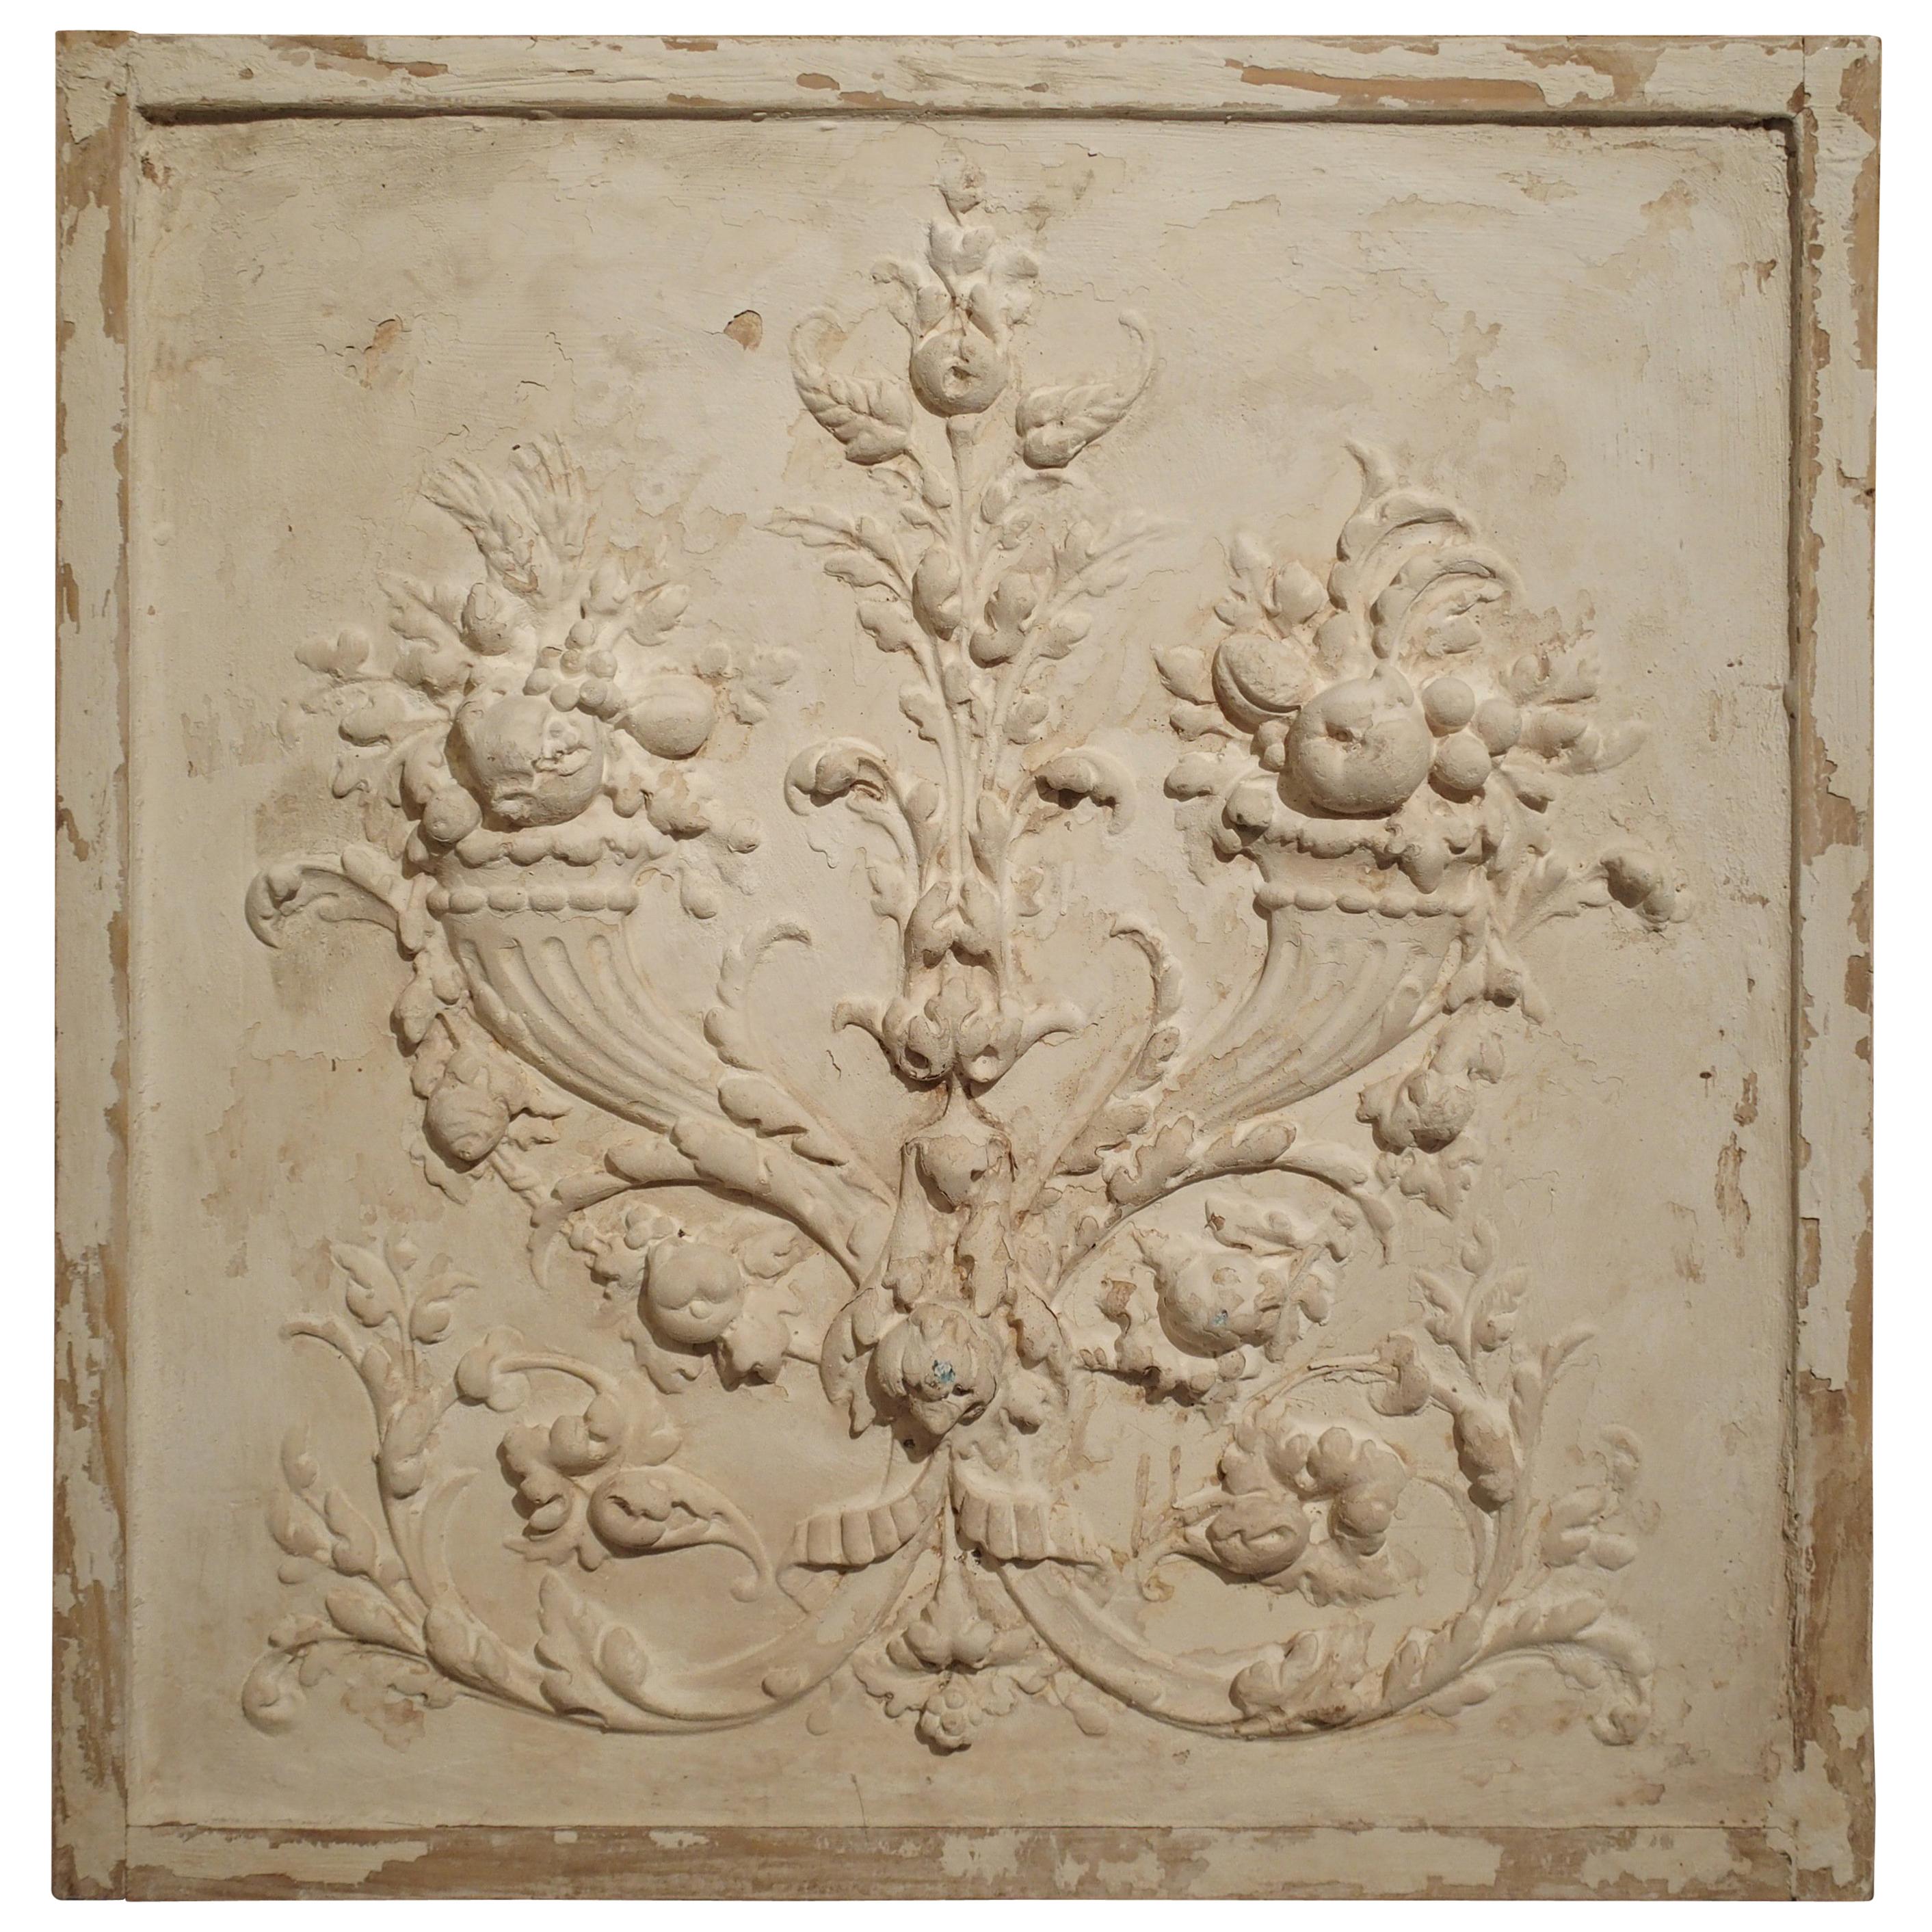 Plaster Bas Relief Cornucopia Panel from France